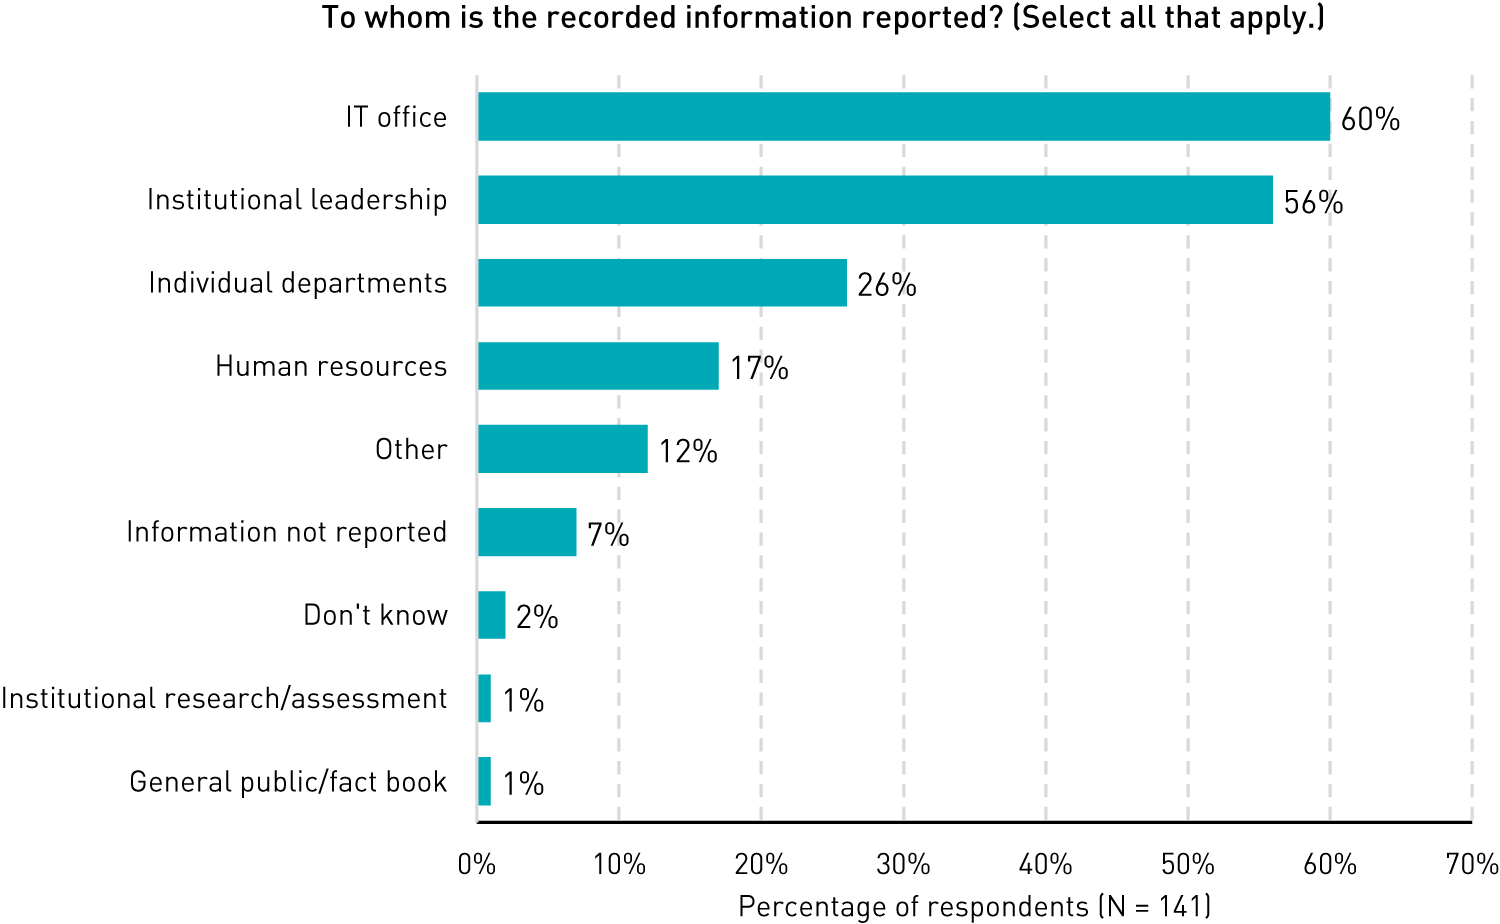 Bar chart showing where collected information is reported: IT office (60%), institutional leadership (56%), individual departments (26%), human resources (17%), other (12%), information not reported (7%), don’t know (2%), institutional research/assessment (1%), and general public/fact book (1%).